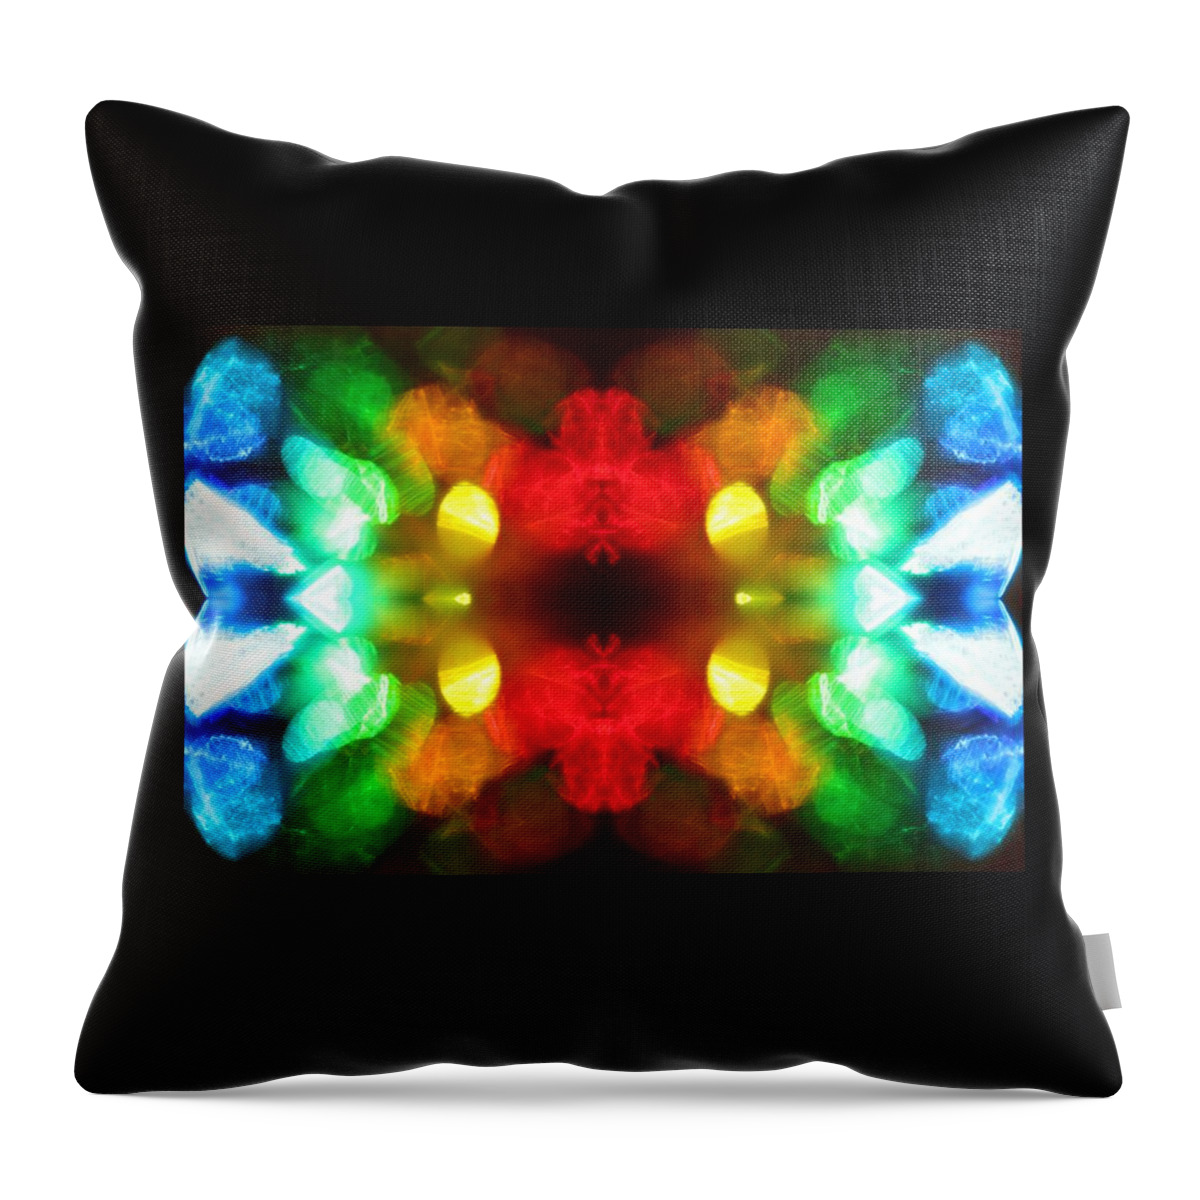 Rainbow Throw Pillow featuring the photograph Boxed Rainbow by Hartmut Knisel